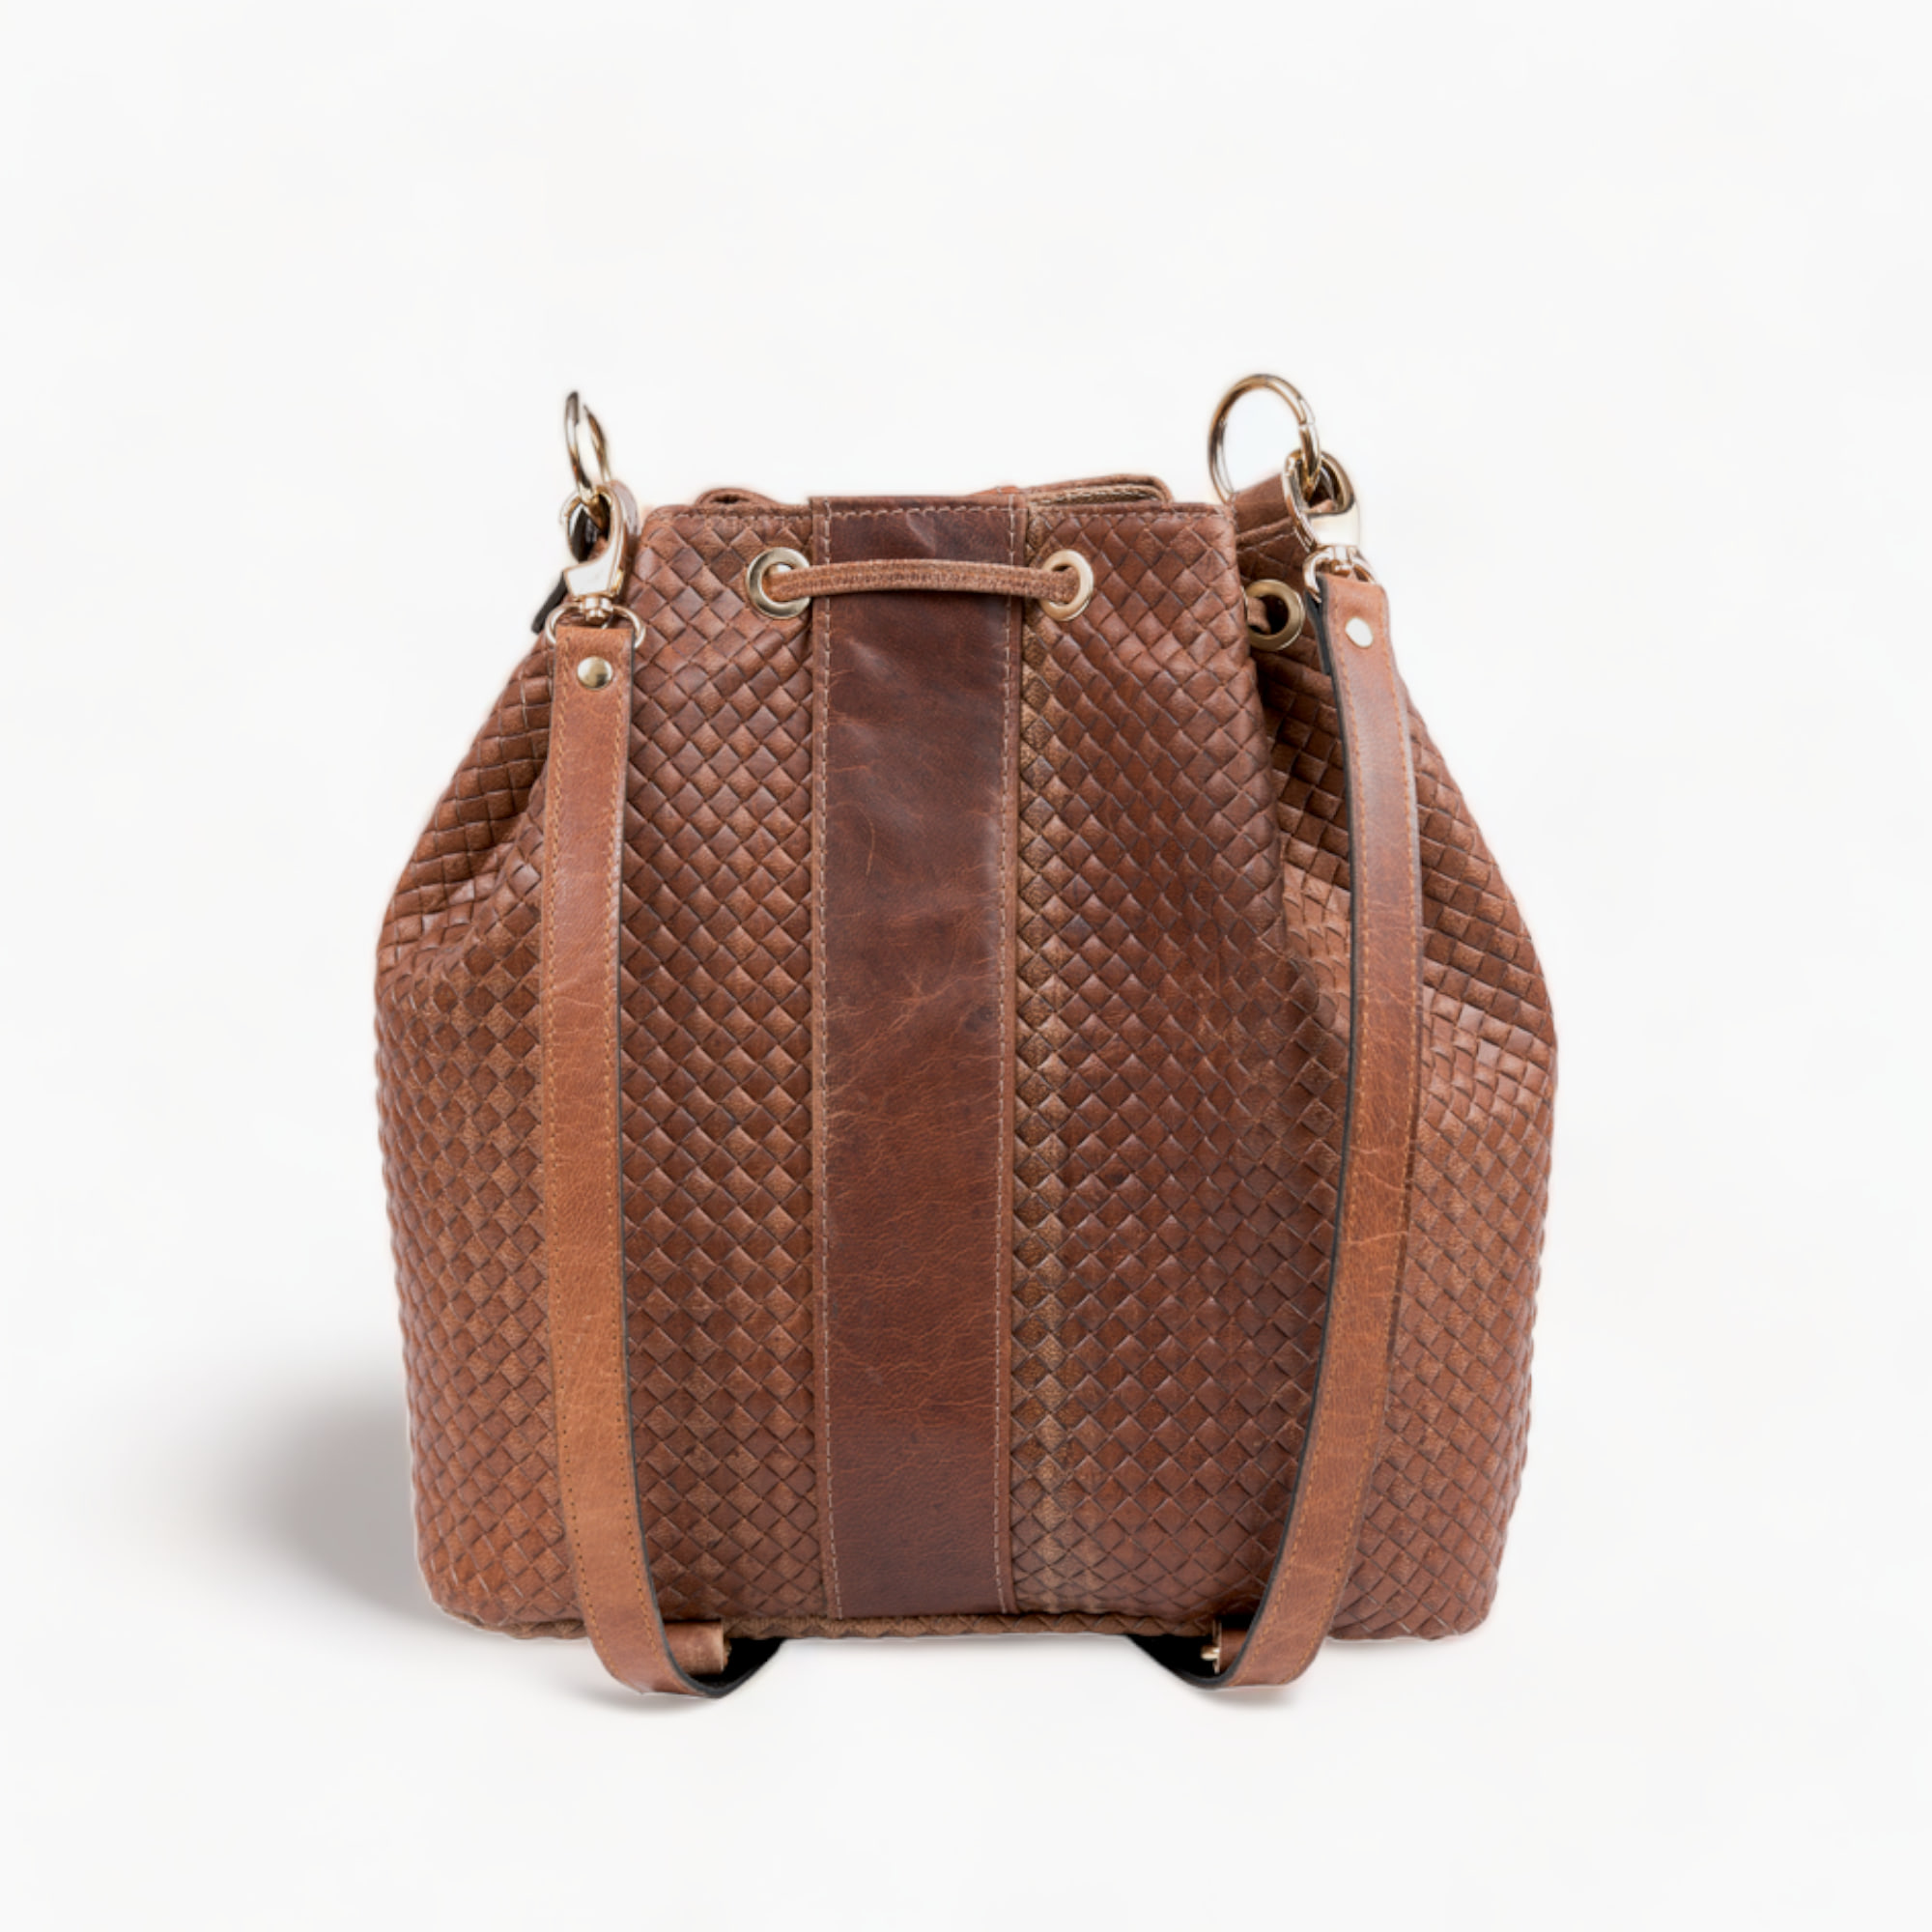 Brown leather polymorphic pouch bag in raffia pattern